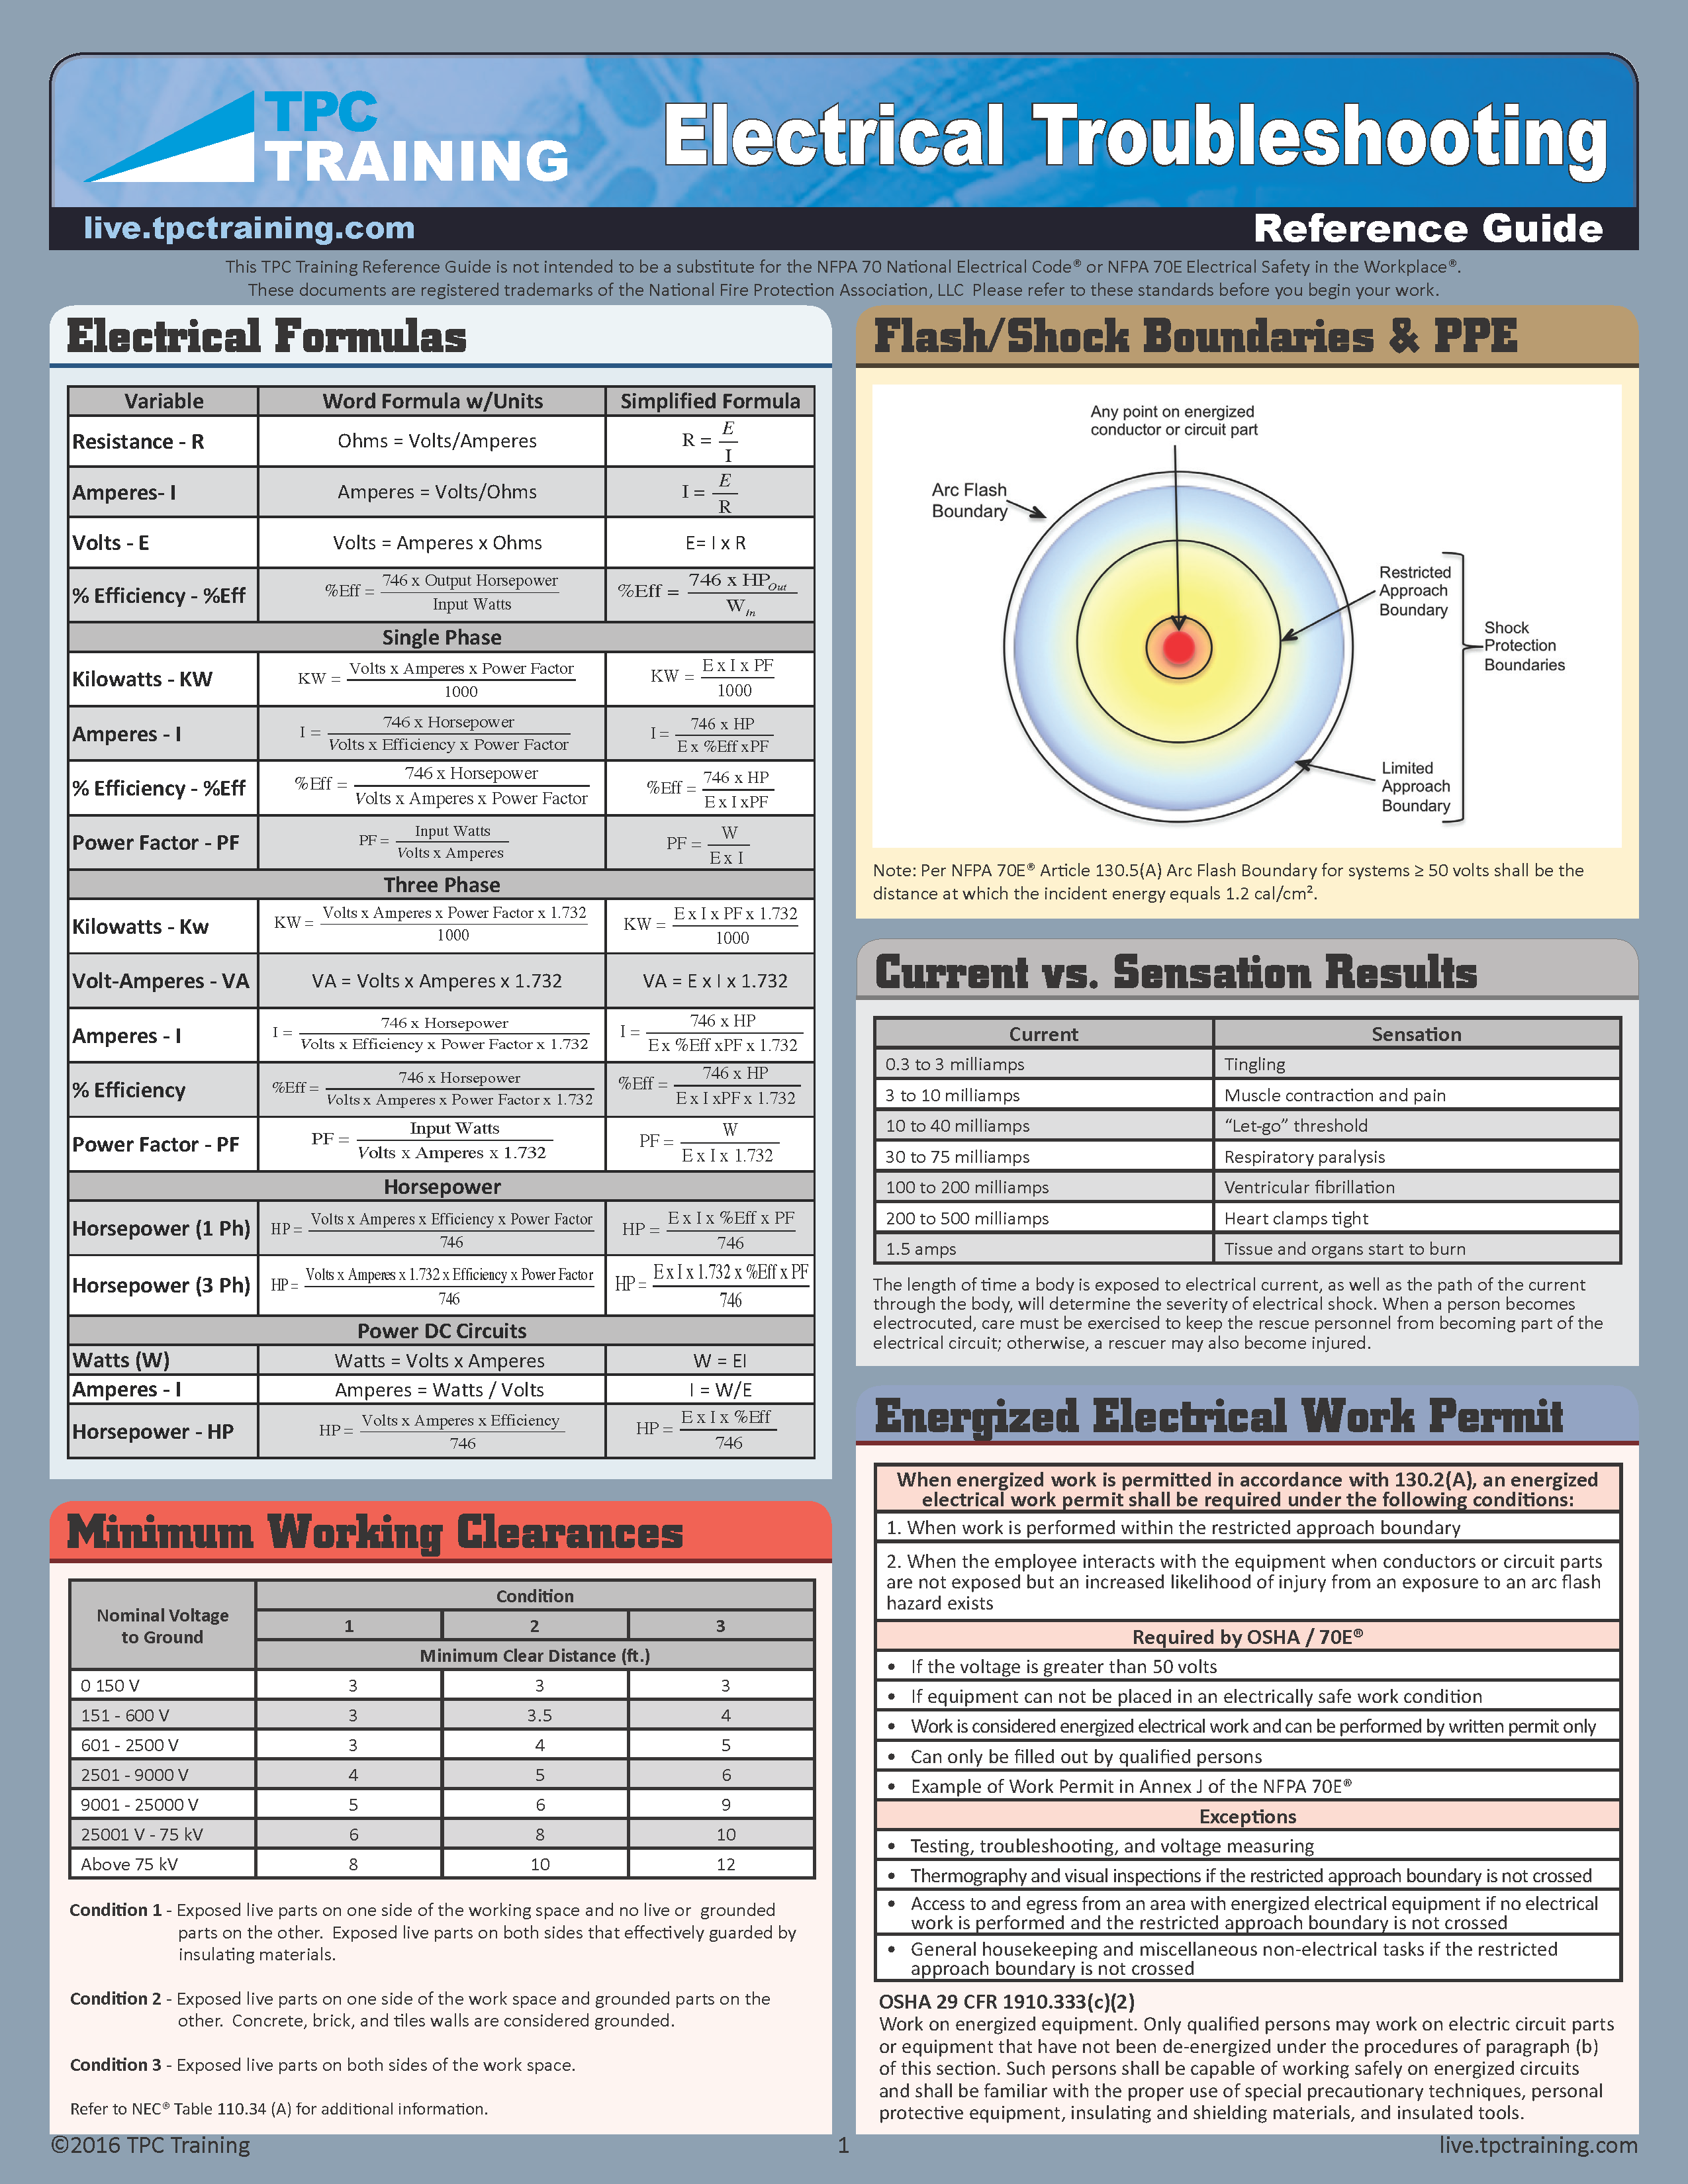 Electrical Troubleshooting Reference Guide